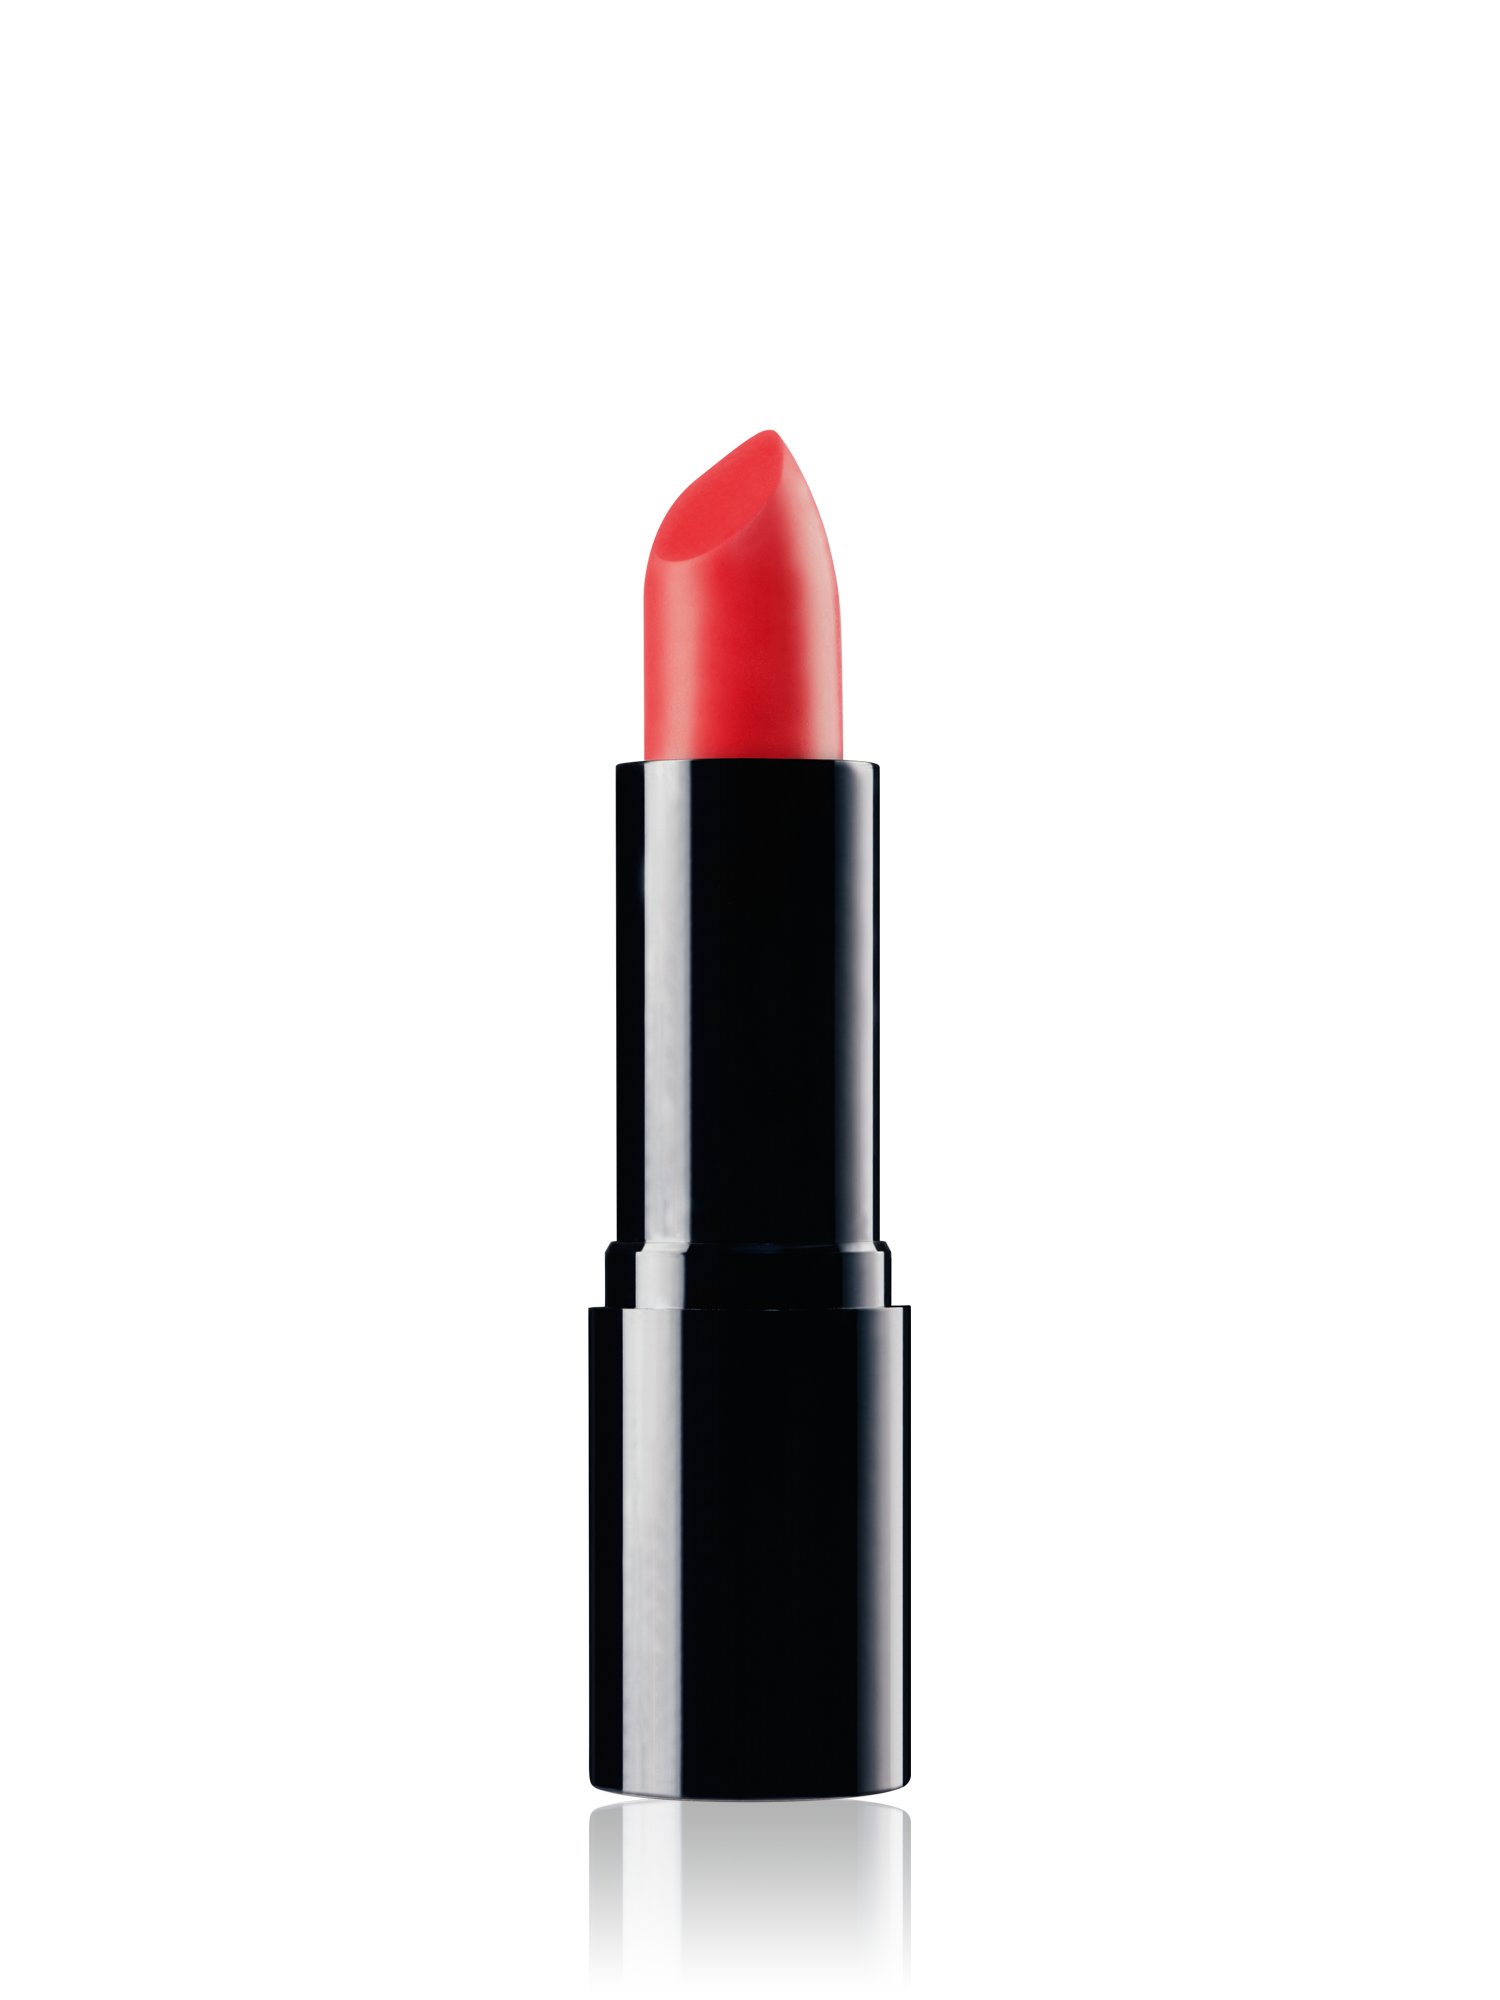 Lipstick PNG HD Images